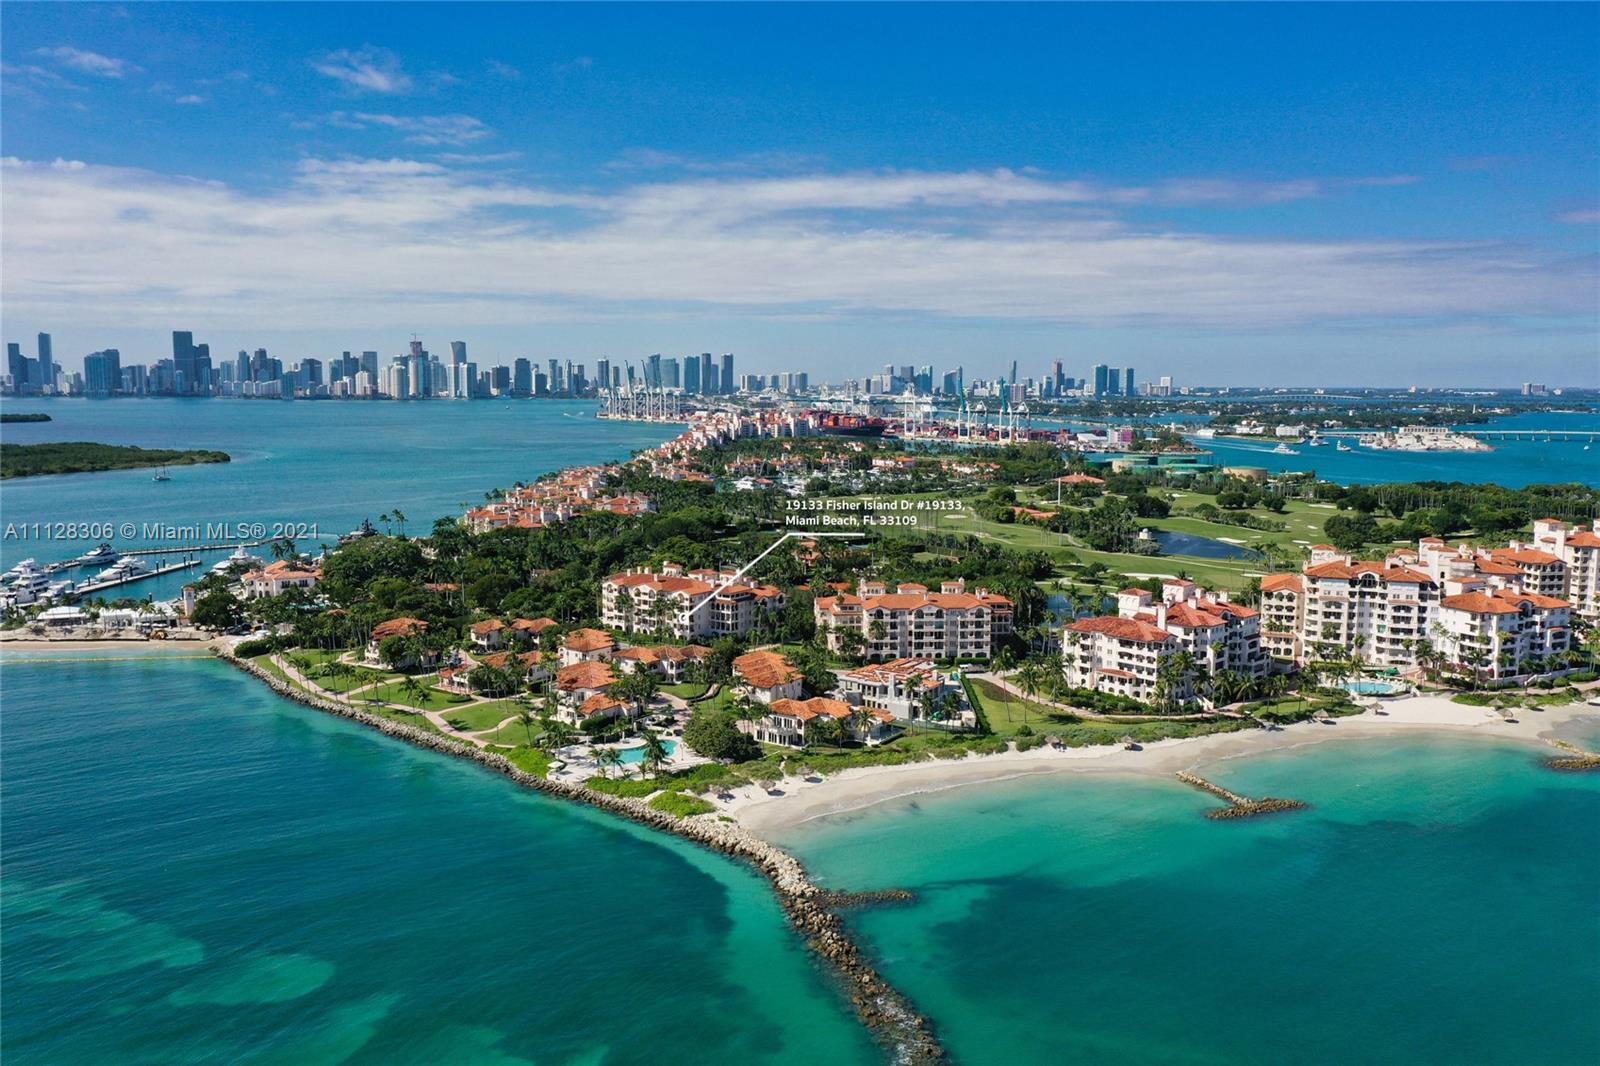 19133  Fisher Island Dr #19133 For Sale A11128306, FL